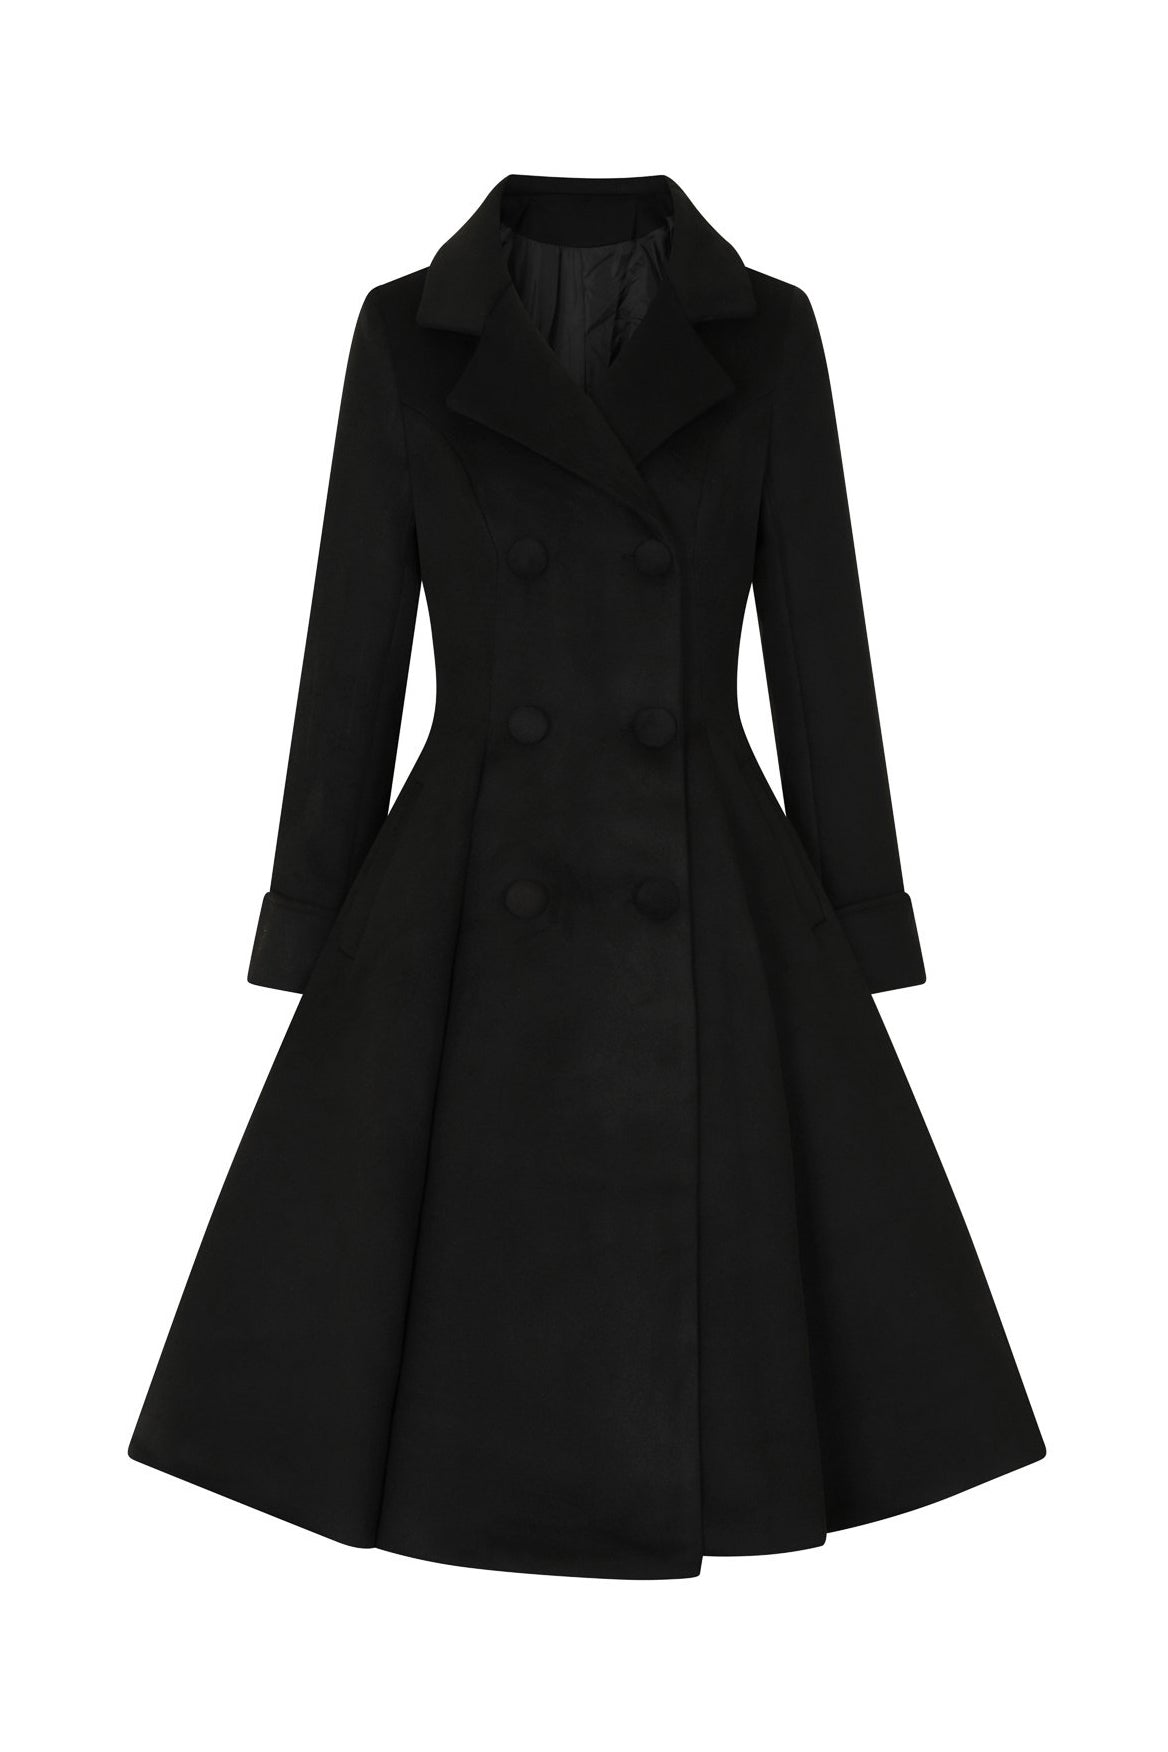 Black Vintage Inspired Classic Double Breasted Swing Coat - Pretty Kitty Fashion